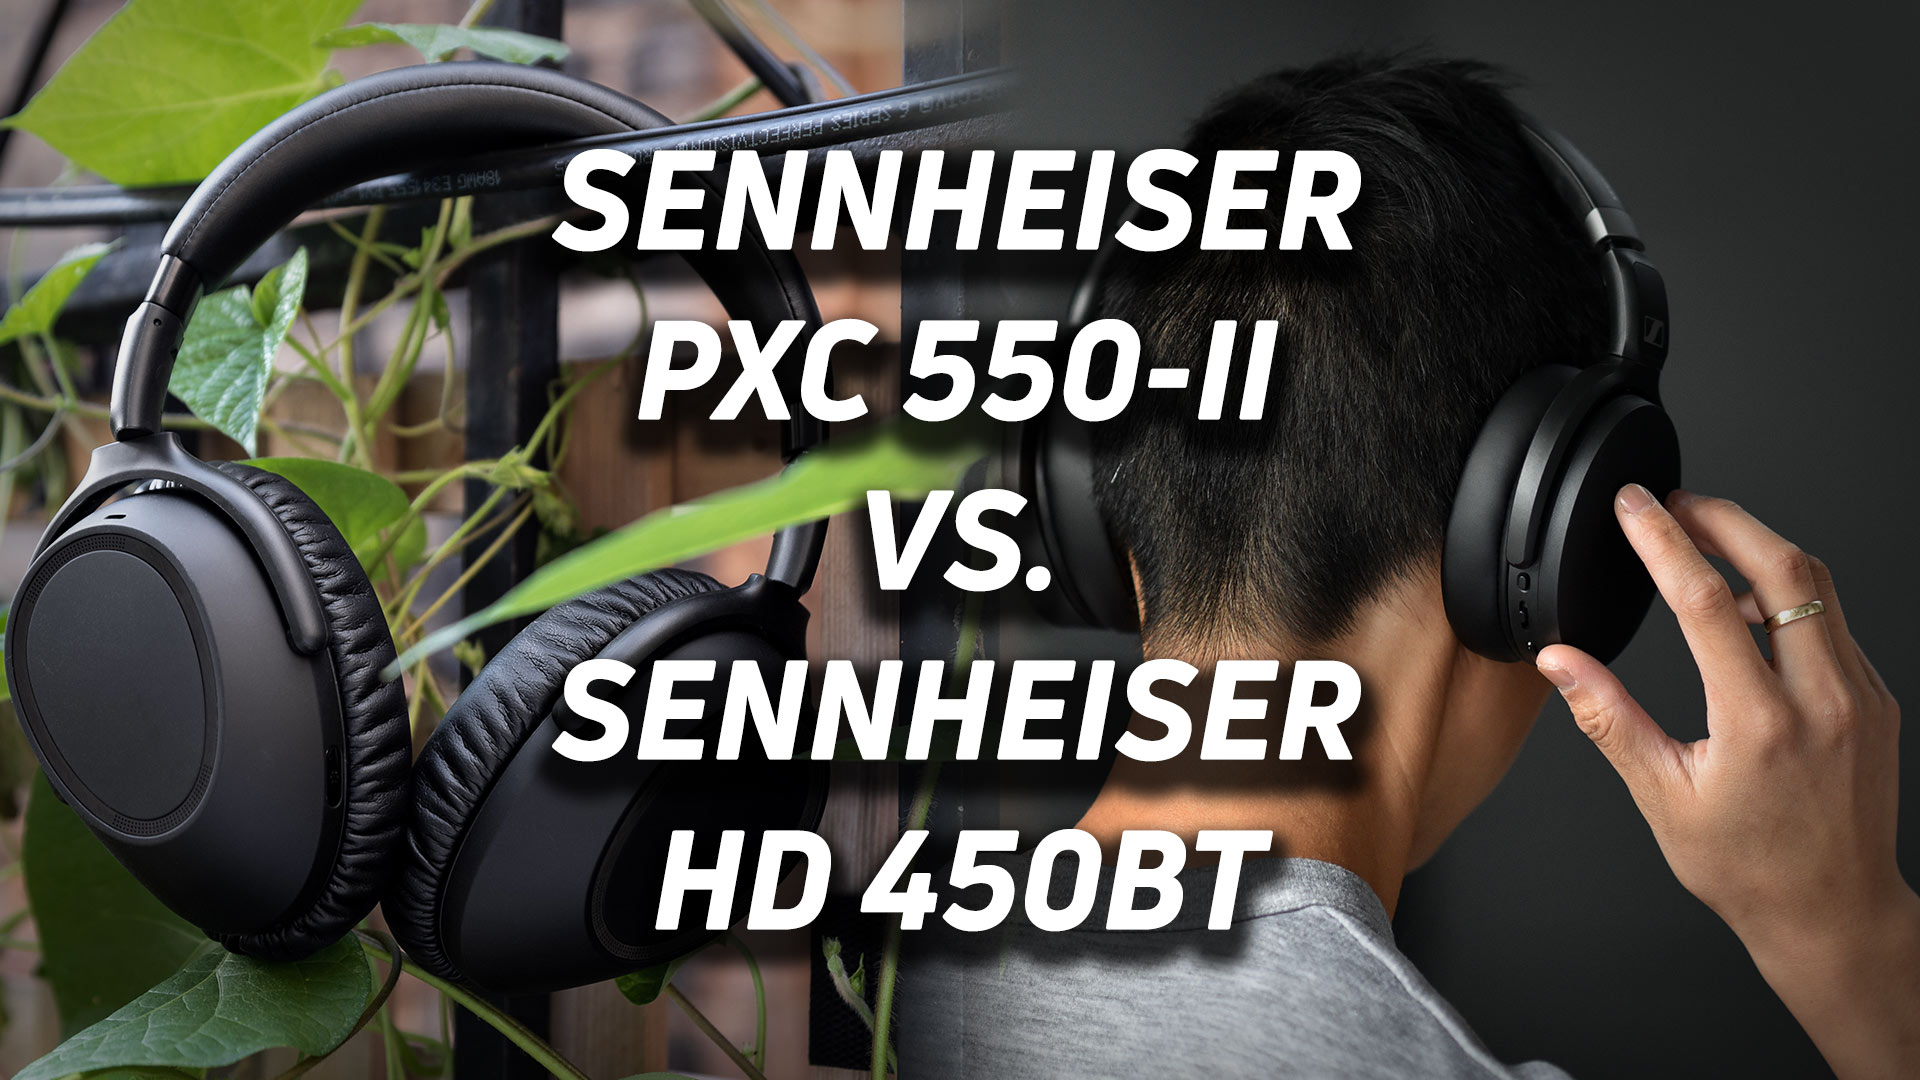 A blended image of the Sennheiser PXC 550-II and Sennheiser HD 450BT with overlaid text reading as such.